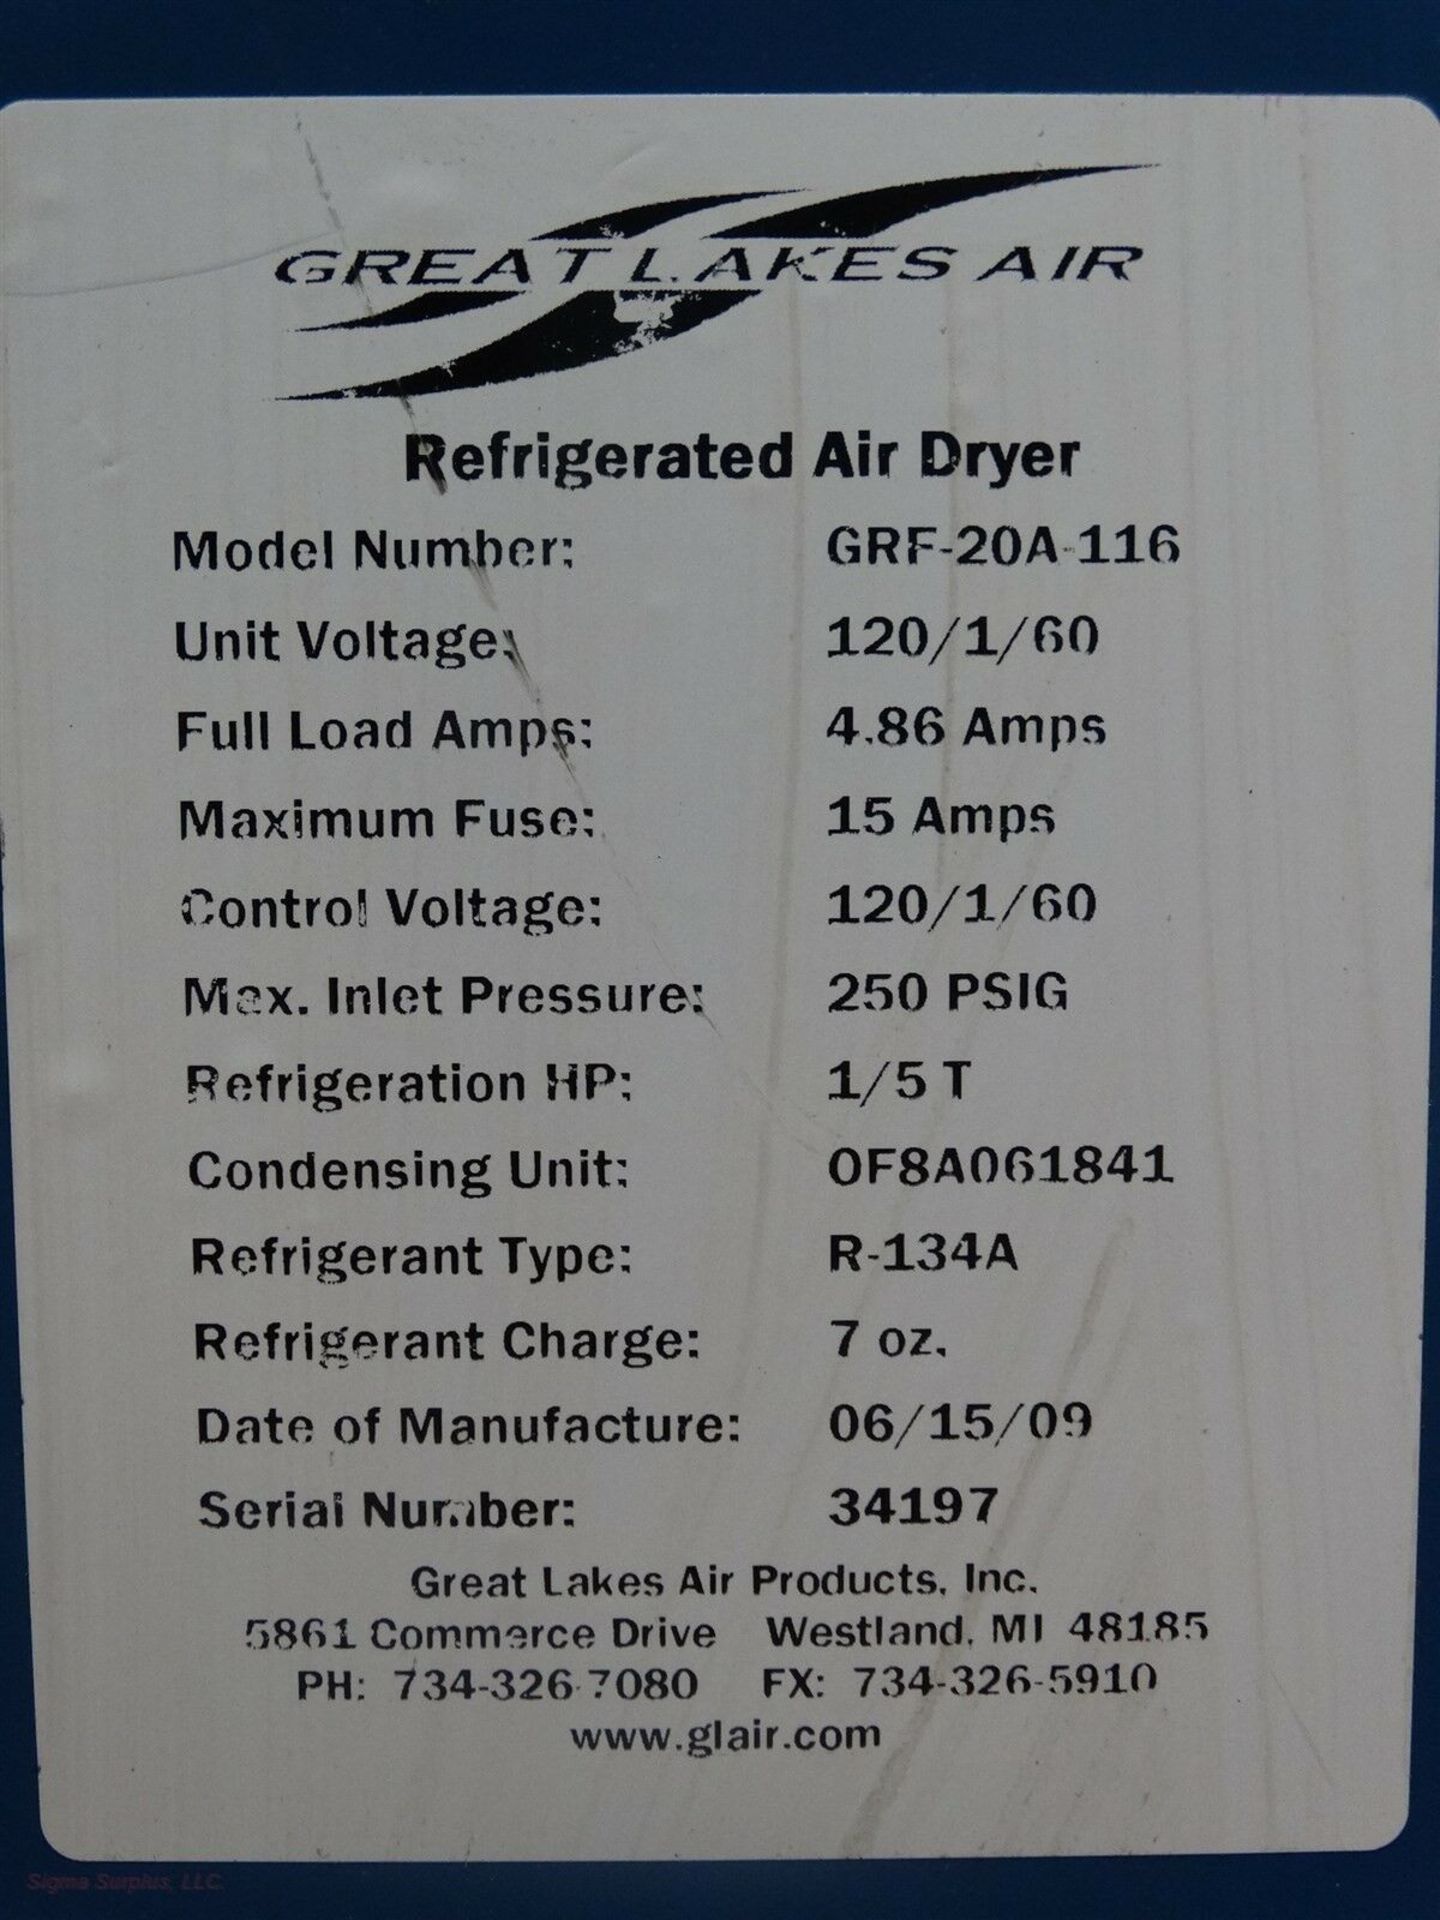 Great Lakes Air Refrigerated Air Dryer GRF-20A-116 Voltage:120/1/60 FLA.4.86A 13309 - Image 7 of 11